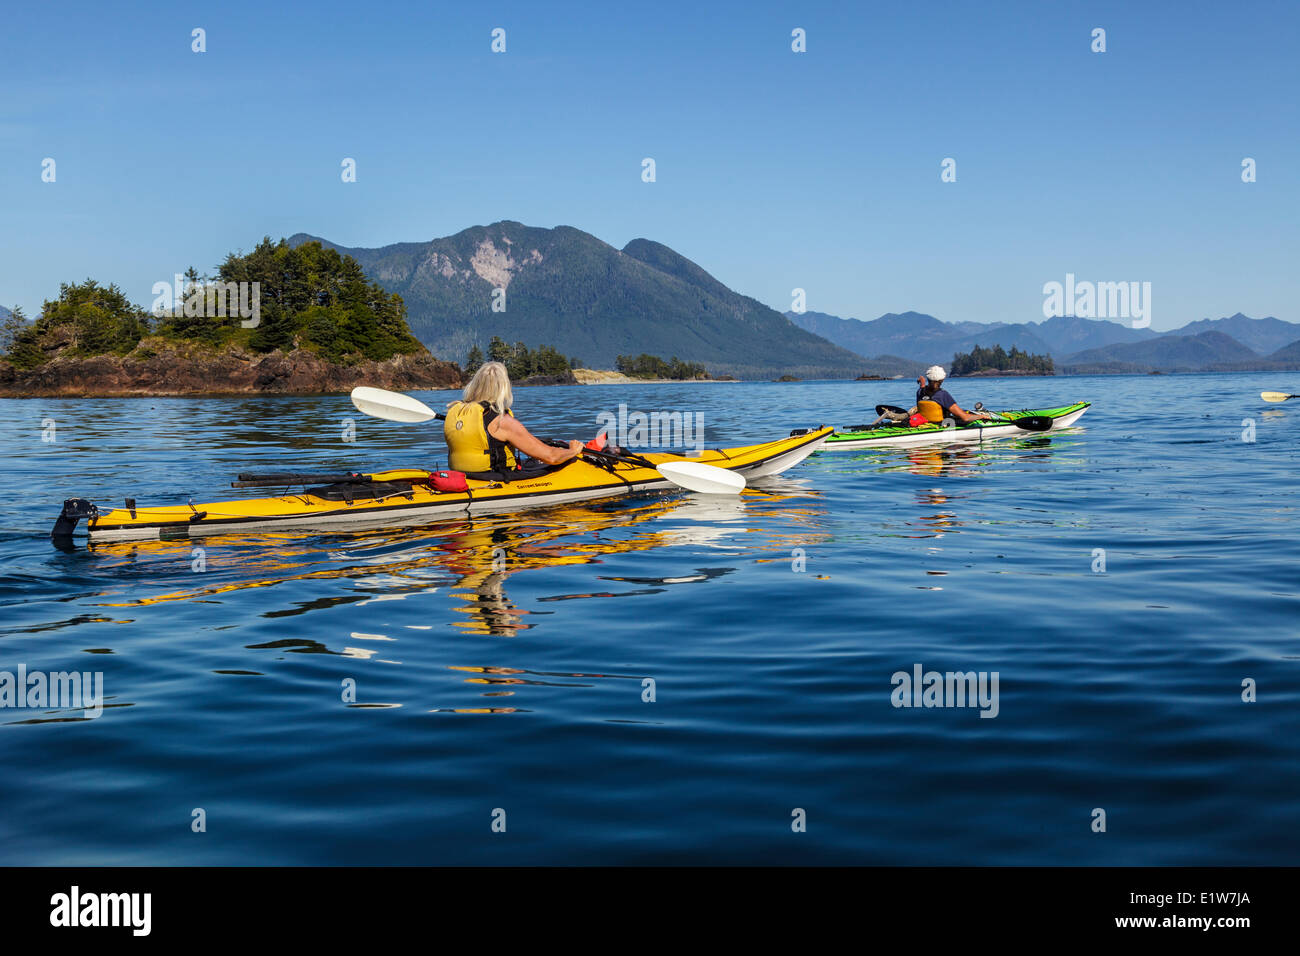 Two kayakers approach Whalers Islet in Clayoquot Sound off the west coast of Vancouver Island, British Columbia, Canada. Model R Stock Photo